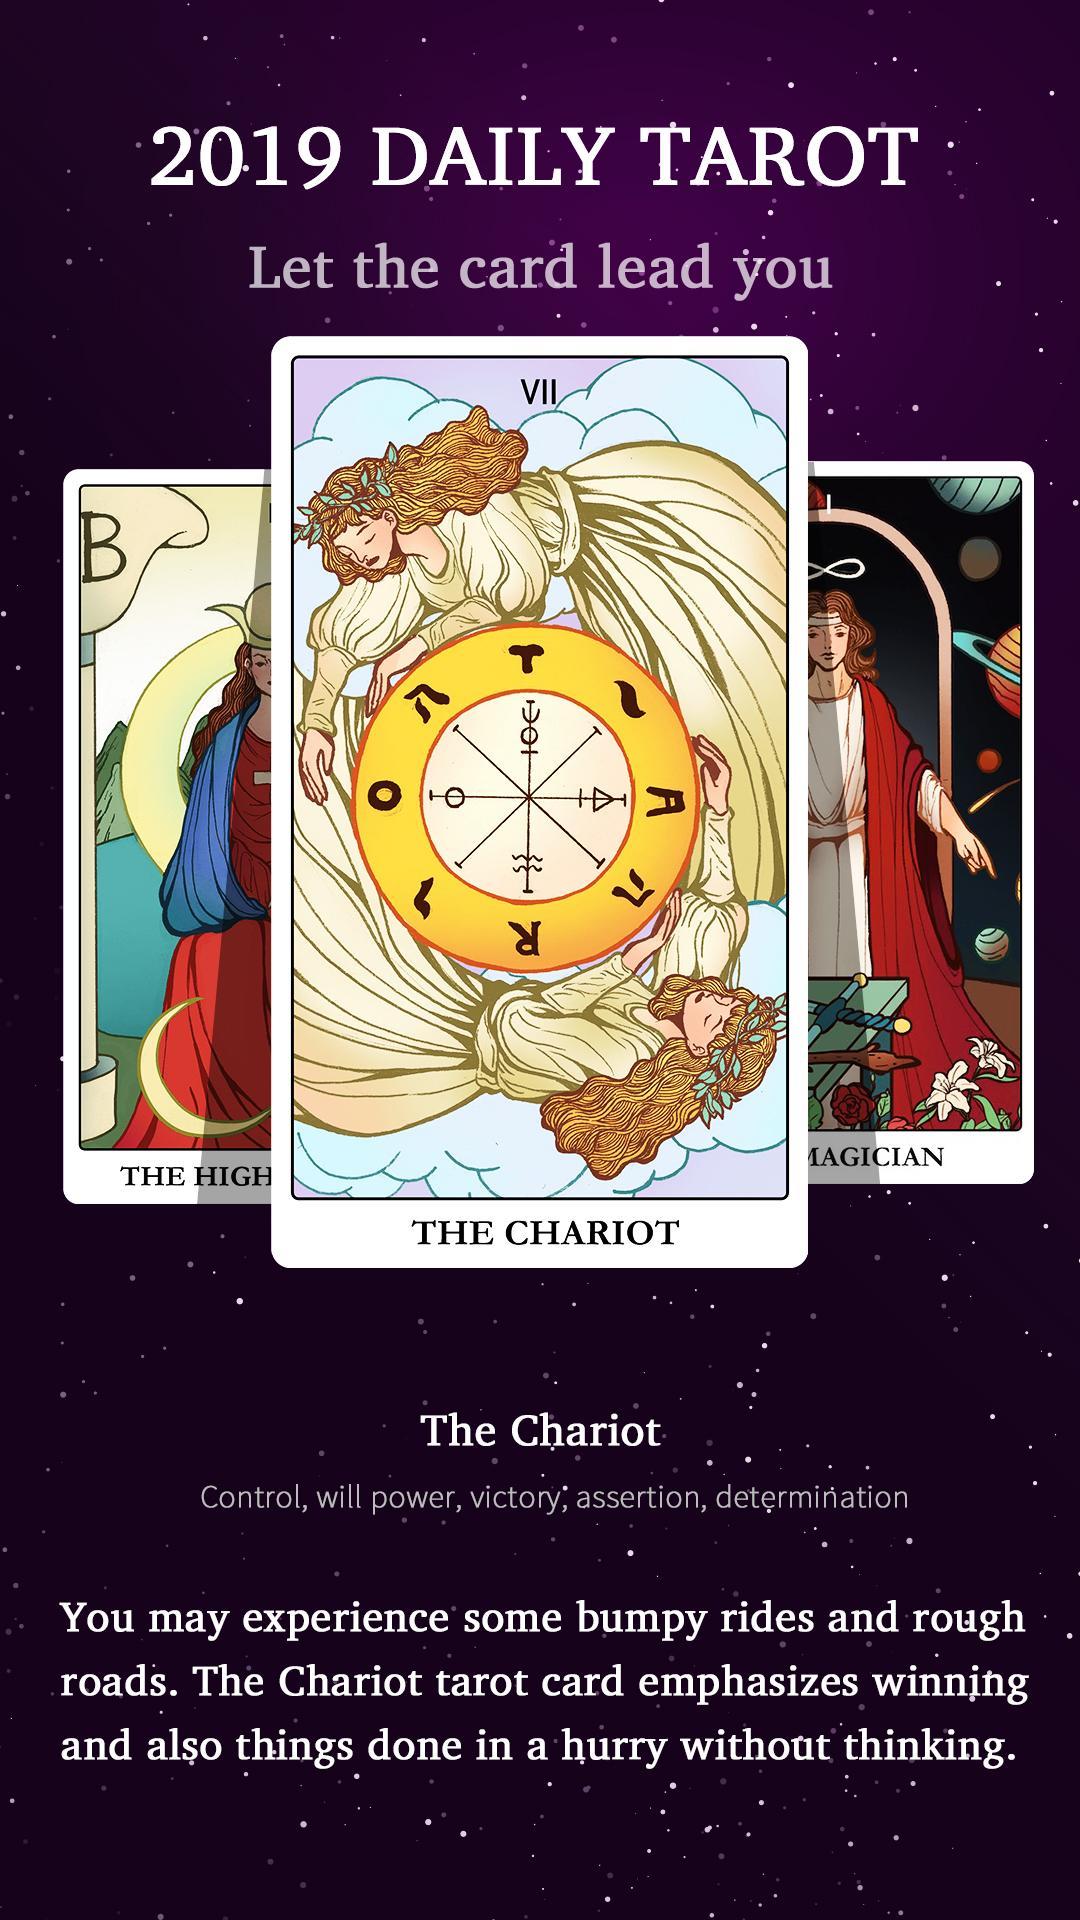 Daily Tarot Plus 2019 - Free Tarot Card Reading for Android - APK Download